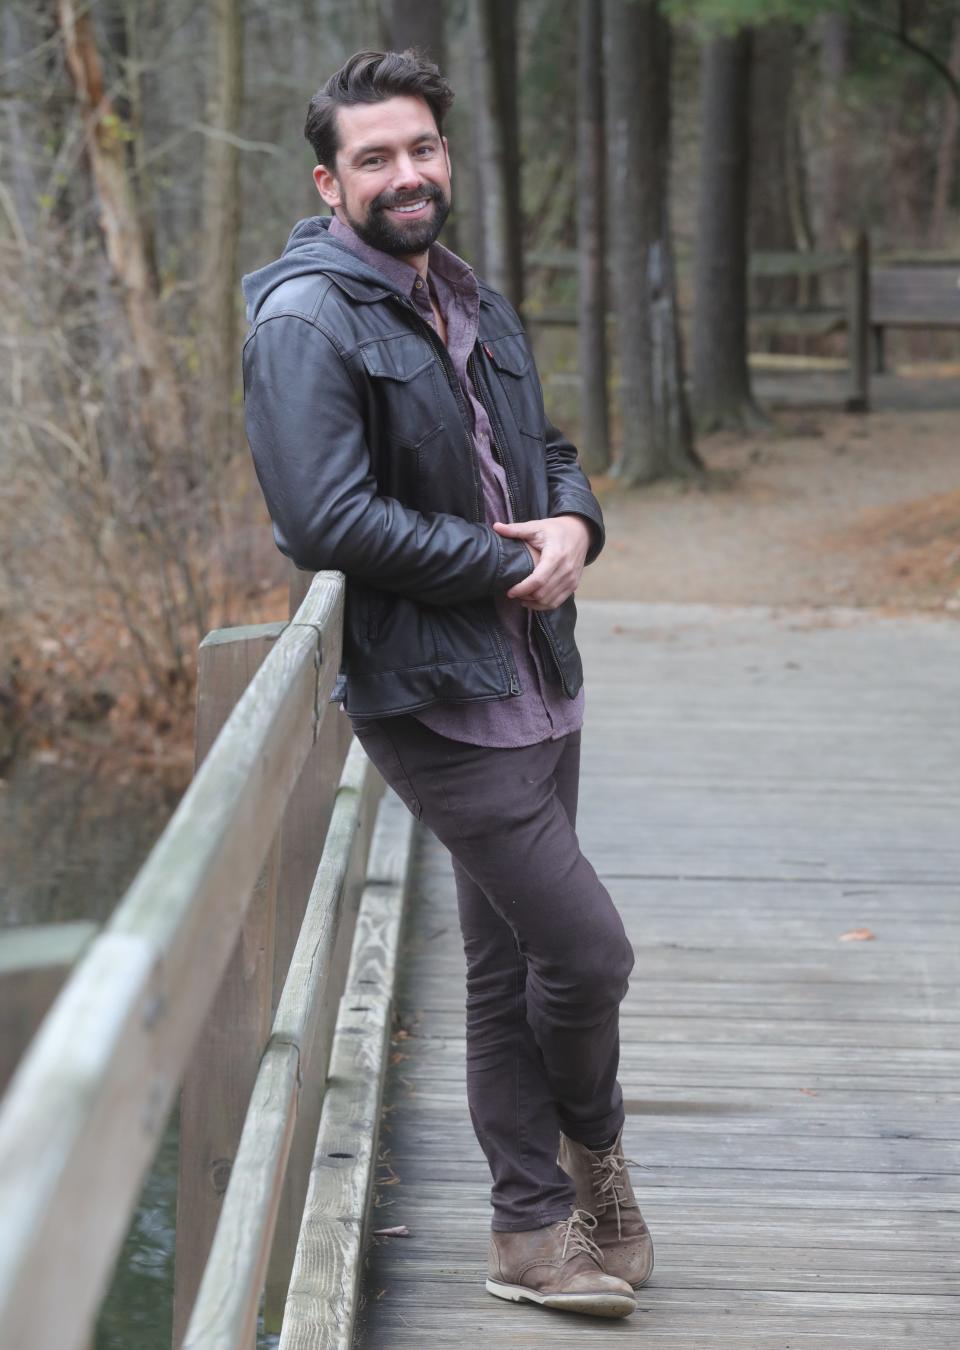 Local "Bachelor in Paradise" star Michael Allio poses at the F.A. Seiberling Nature Realm. Because the series is filmed on a beach, nature and its critters were just as much a part of contestants’ lives as the cameras.